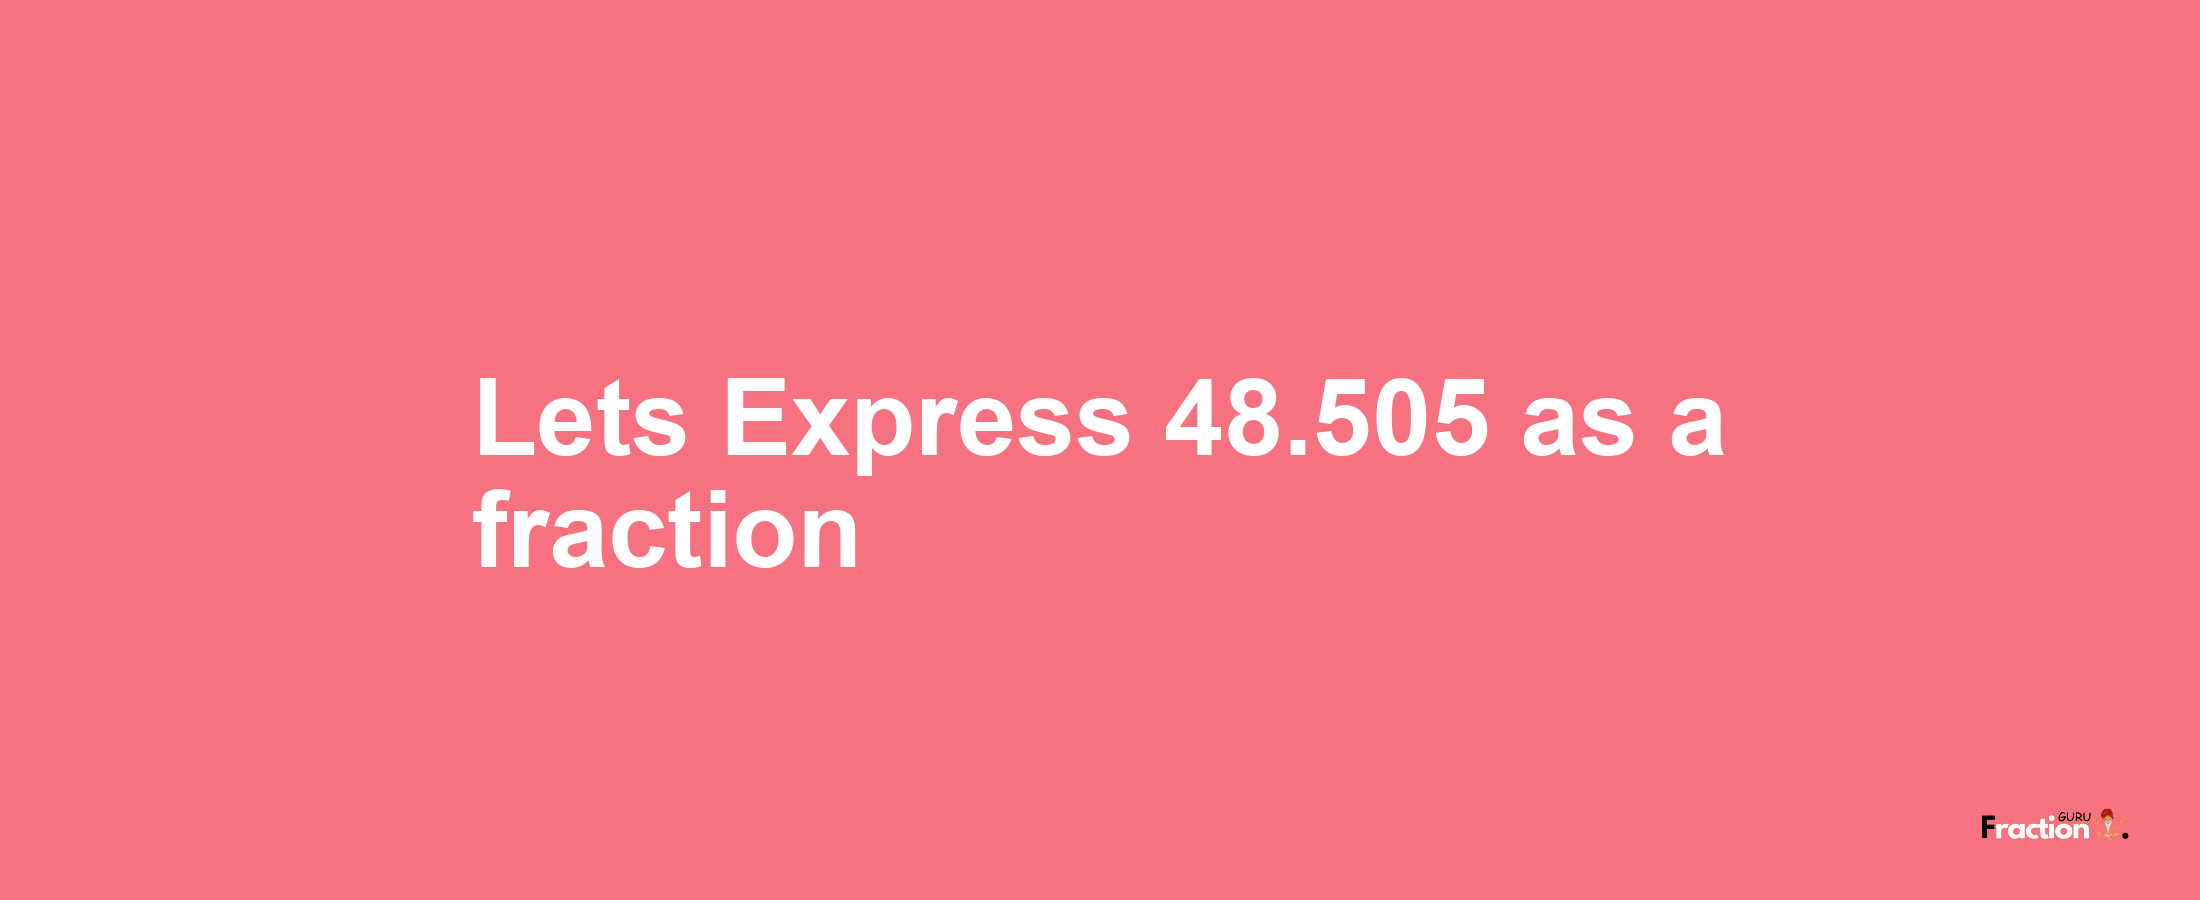 Lets Express 48.505 as afraction